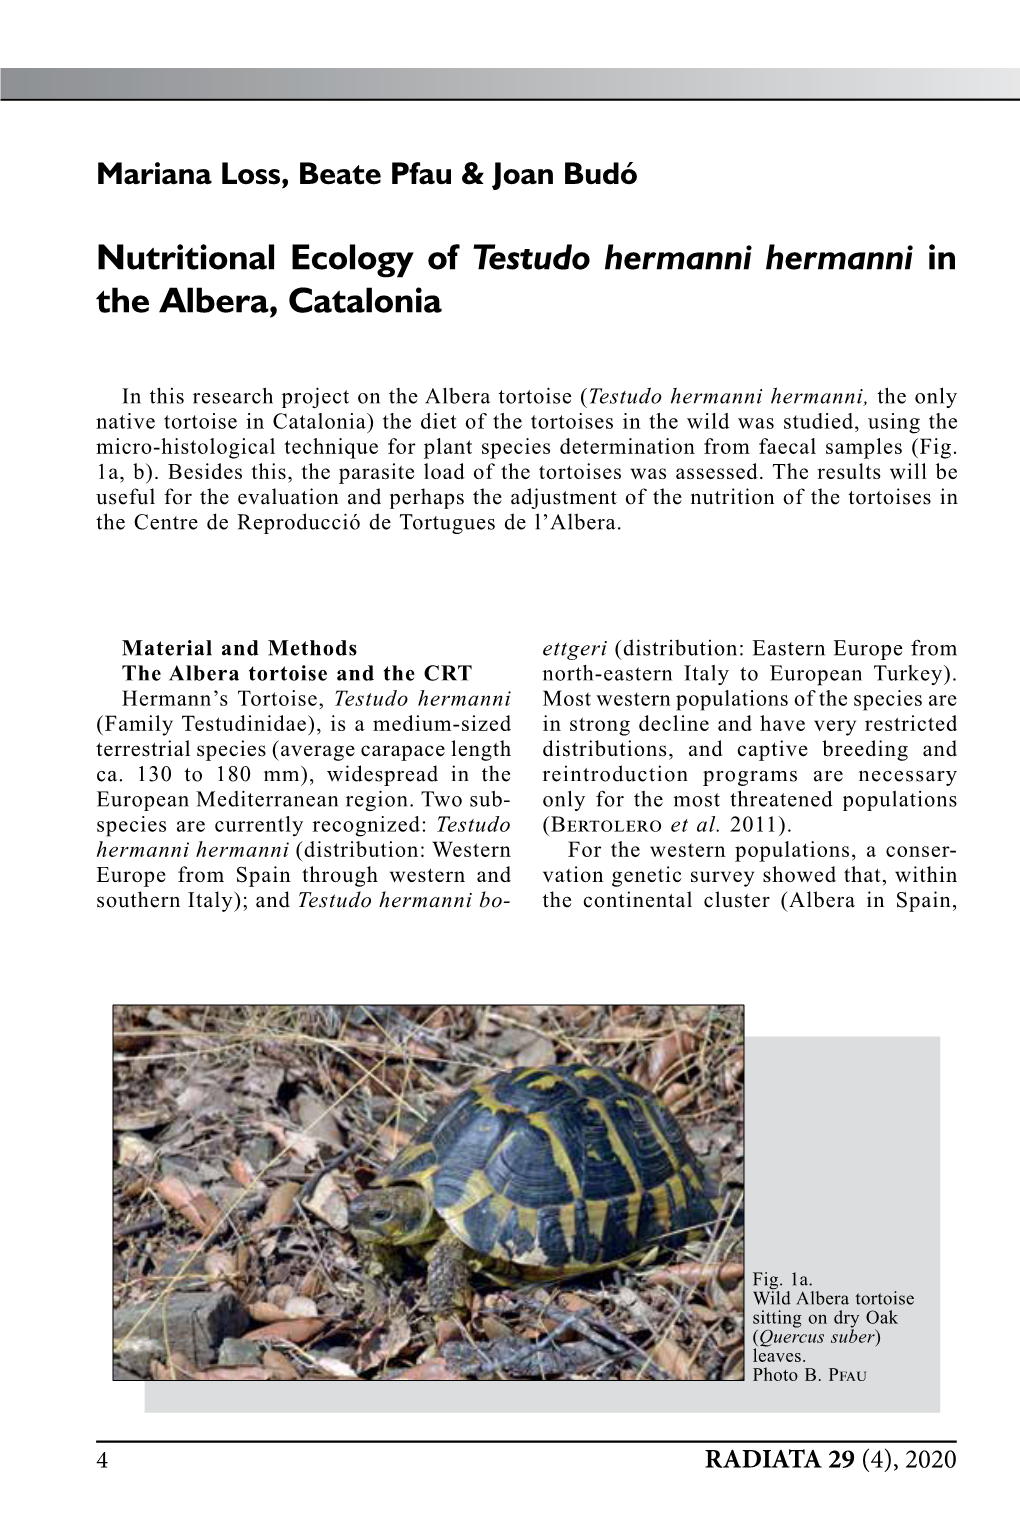 Nutritional Ecology of Testudo Hermanni Hermanni in the Albera, Catalonia